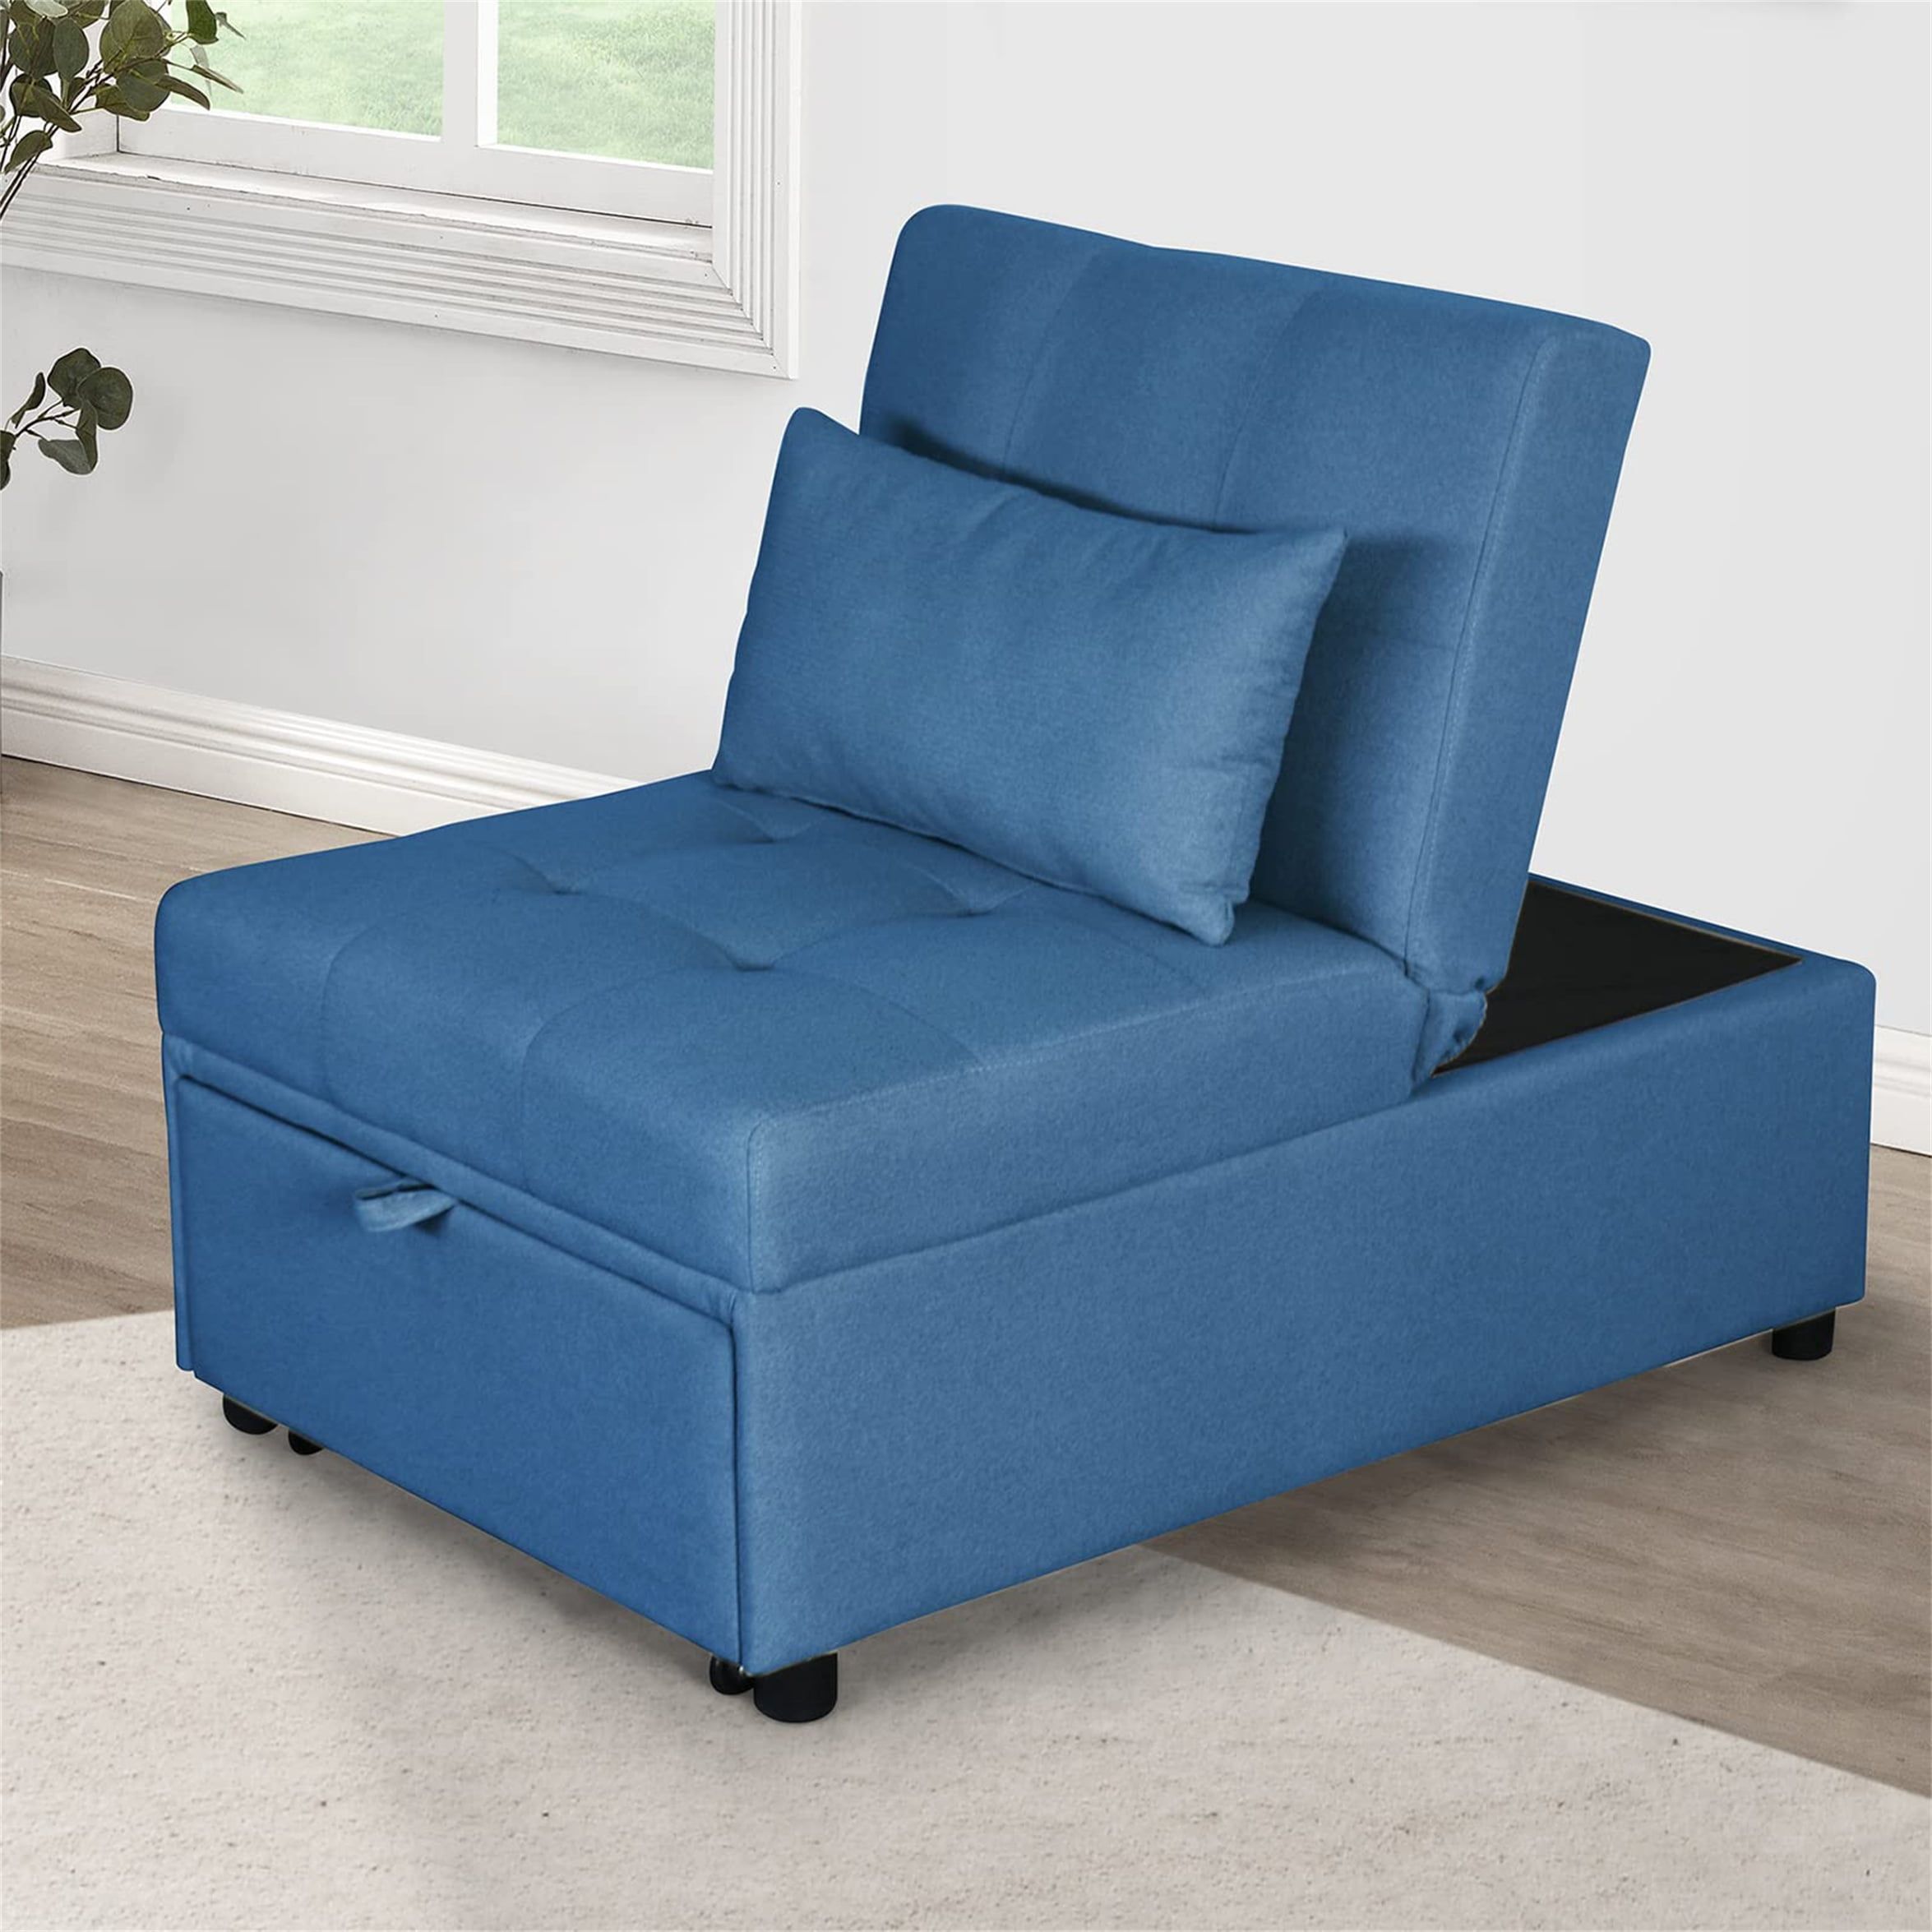 Aukfa Convertible Chair Bed  4 In 1 Multi Functional Folding Ottoman Bed  Single Sleeper Sofa Chaise Lounge  Blue – Walmart For Blue Folding Bed Ottomans (View 2 of 15)